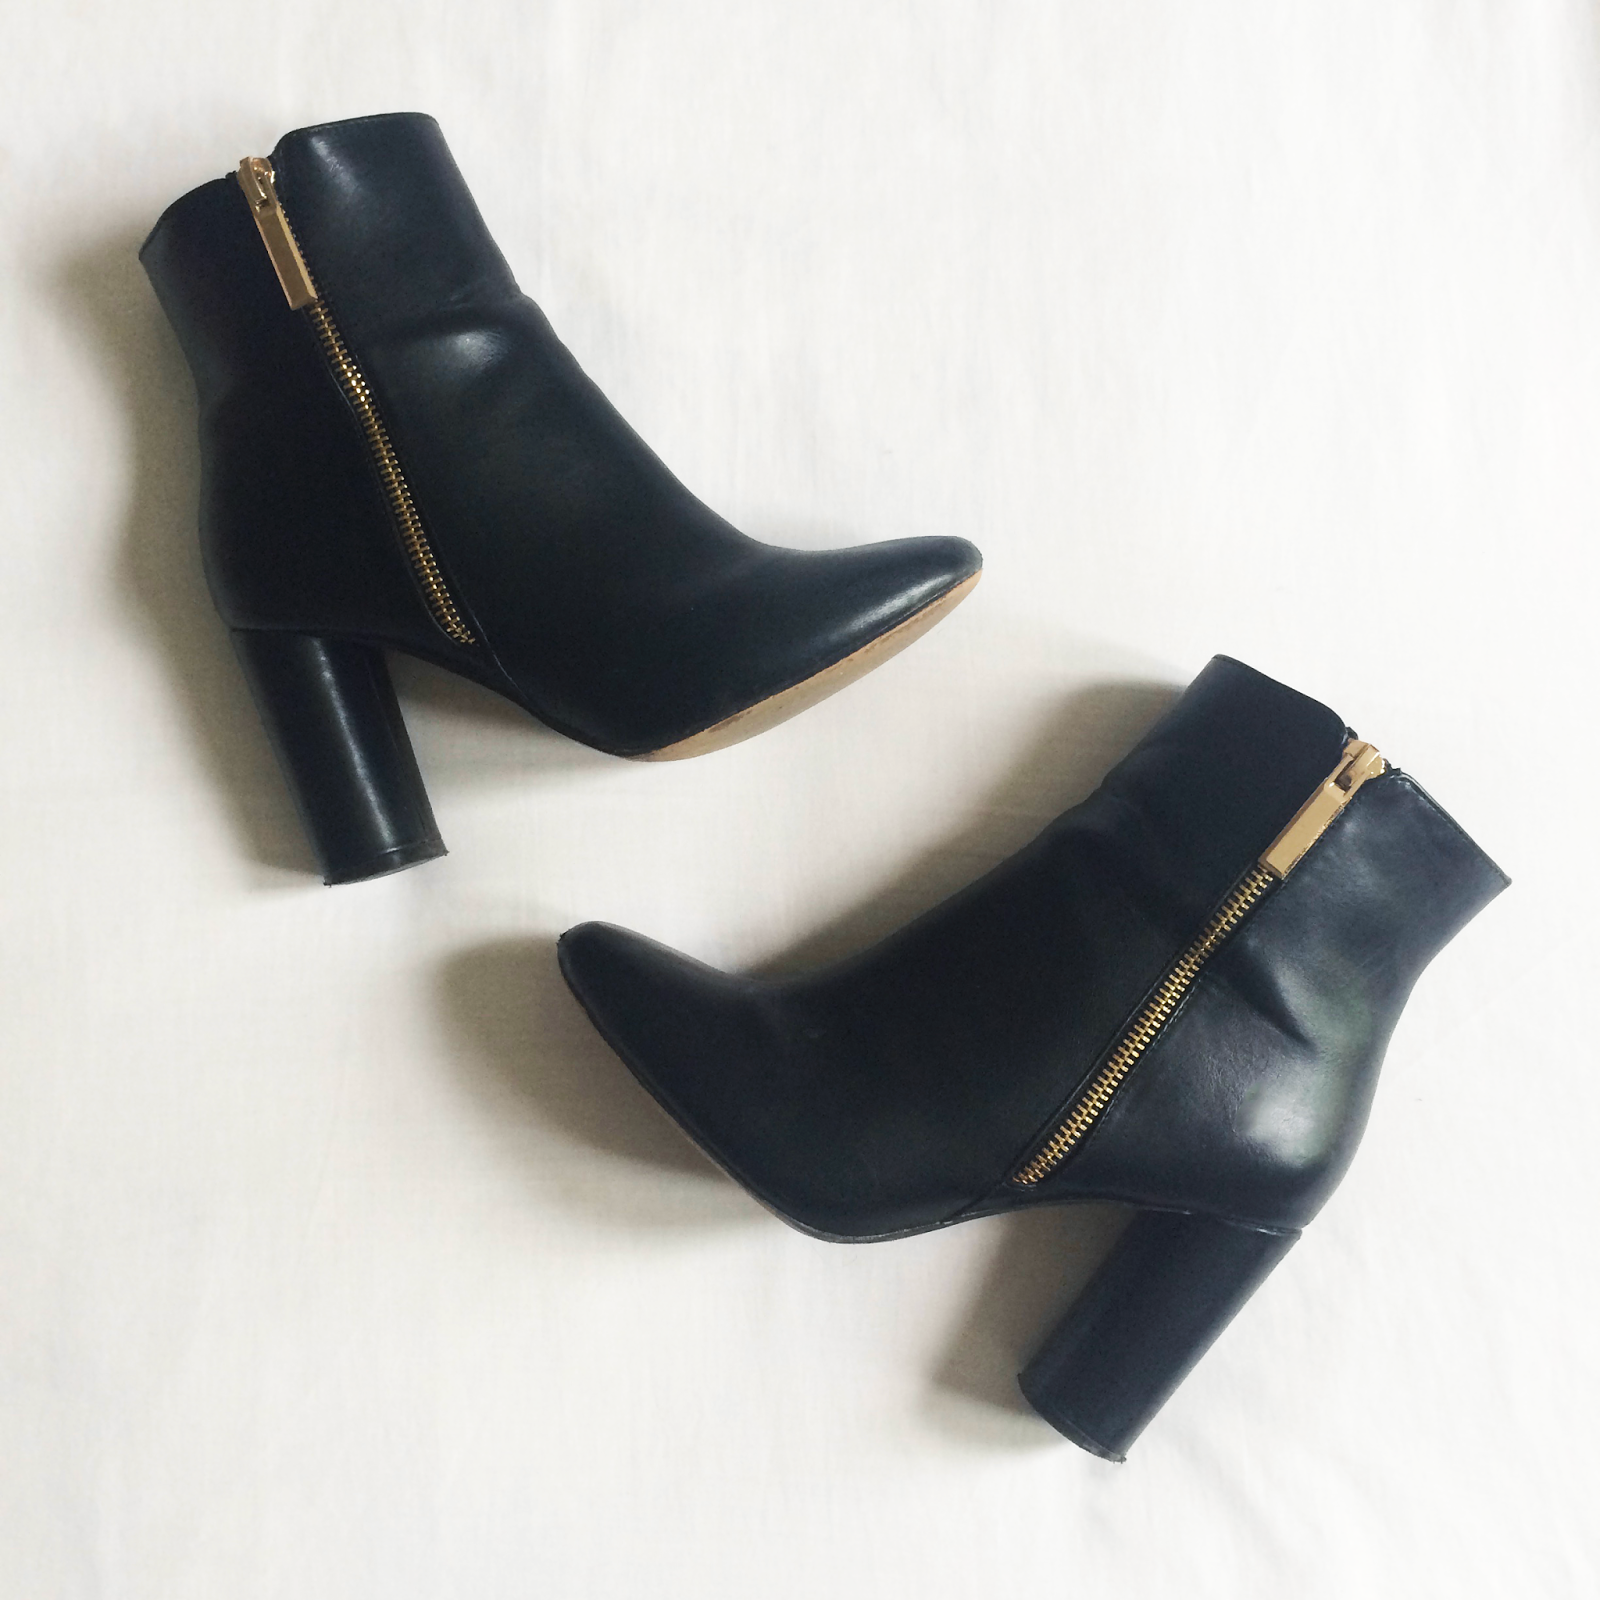 asos truffle black almond toe heeled faux leather boots gold zip fashion blogger